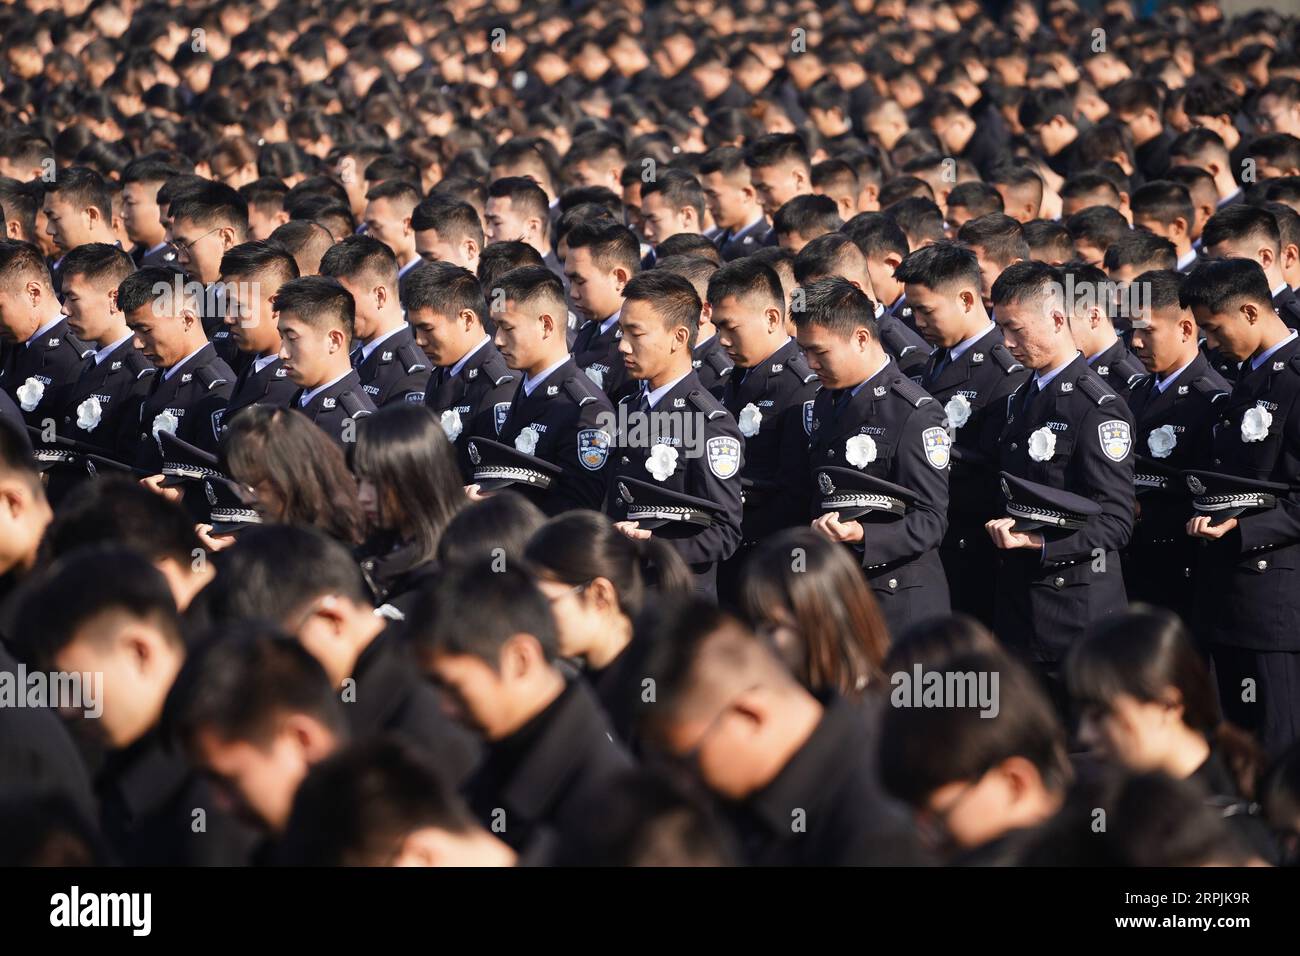 191213 -- NANJING, Dec. 13, 2019 -- People mourn at a national memorial ceremony to commemorate the victims of the Nanjing Massacre at the memorial hall for the massacre victims in Nanjing, east China s Jiangsu Province, Dec. 13, 2019.  Xinhua Headlines: China holds national memorial ceremony for Nanjing Massacre victims JixChunpeng PUBLICATIONxNOTxINxCHN Stock Photo